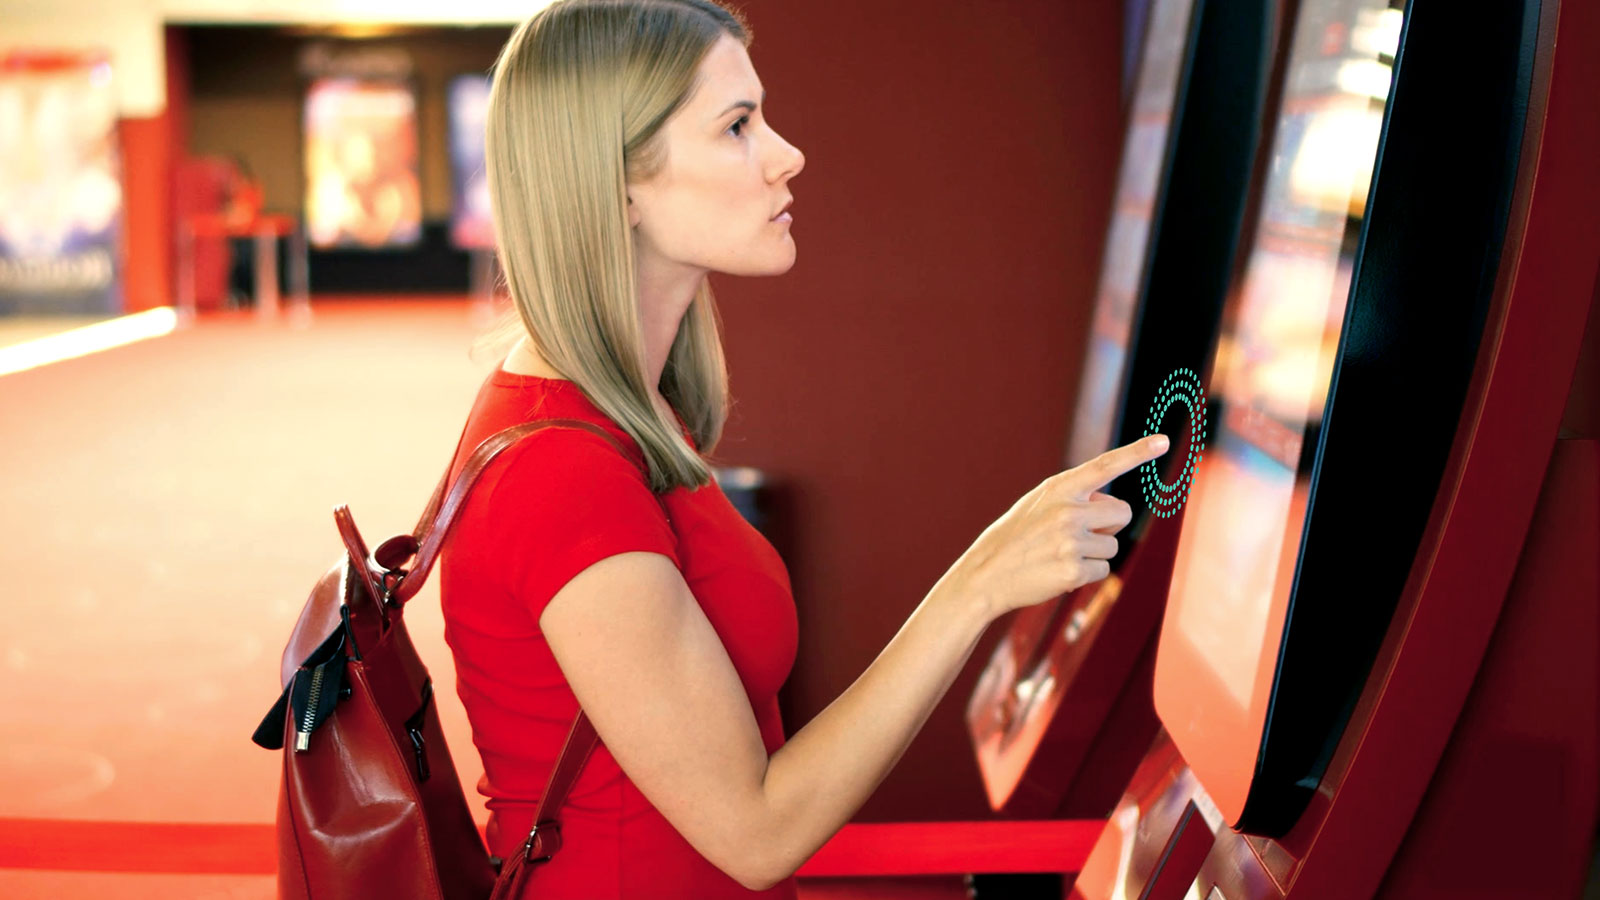 Lady wearing red top using a touchless kiosk